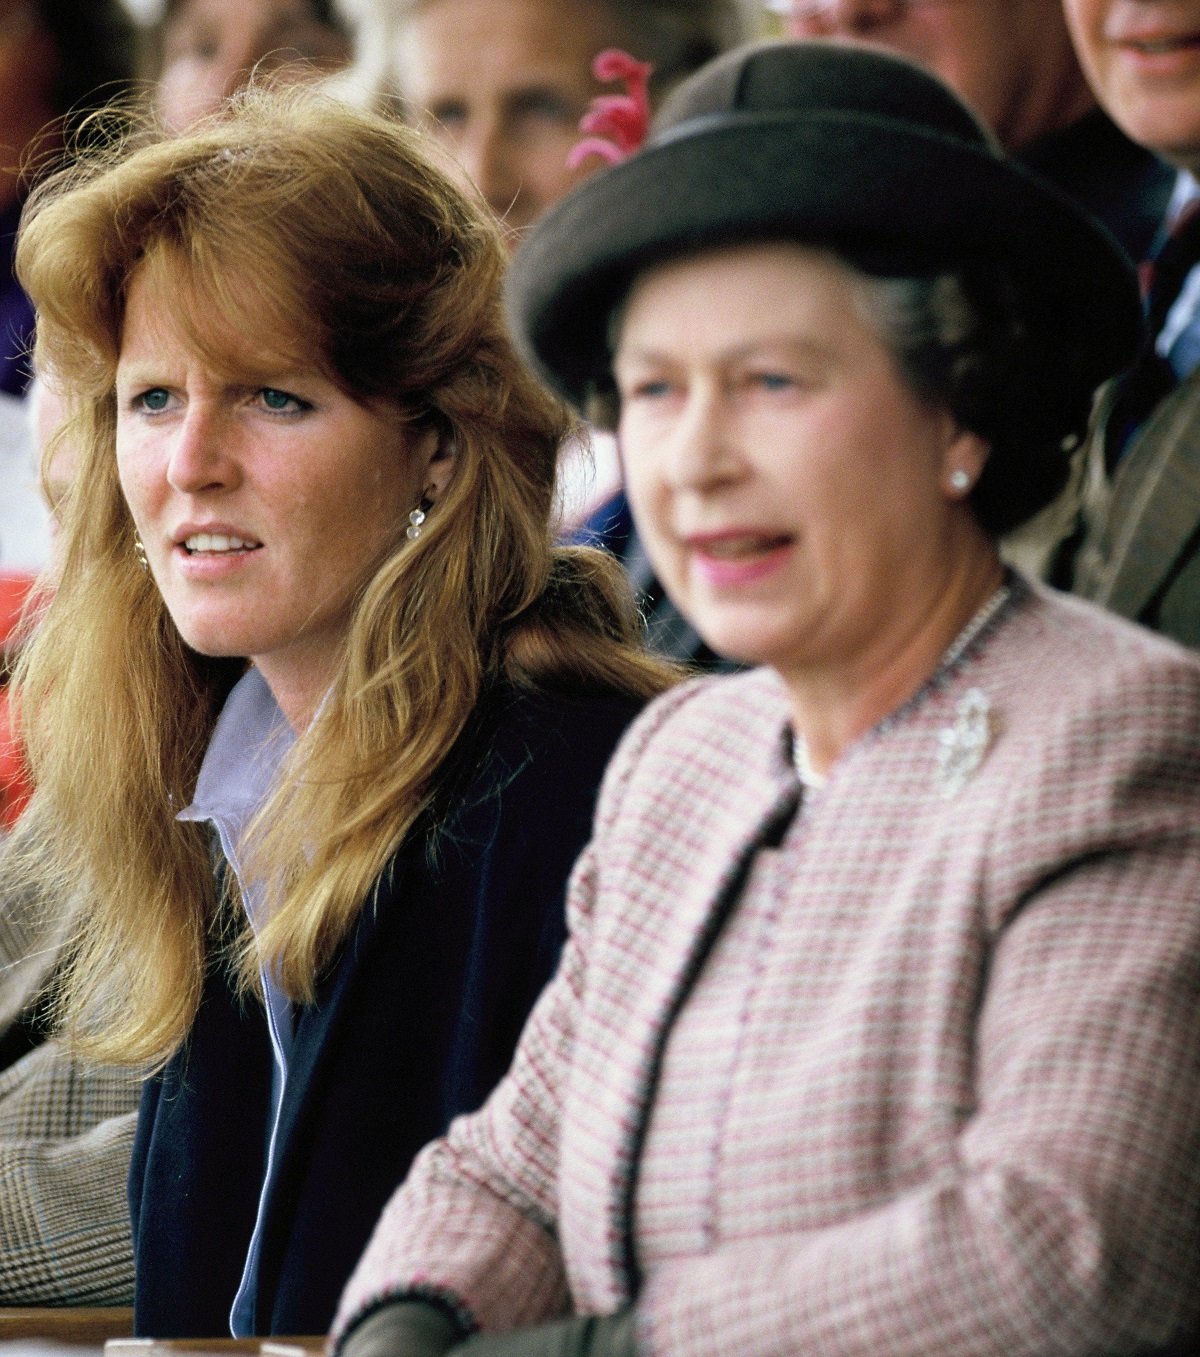 Sarah Ferguson and Queen Elizabeth II at an event together in 1990